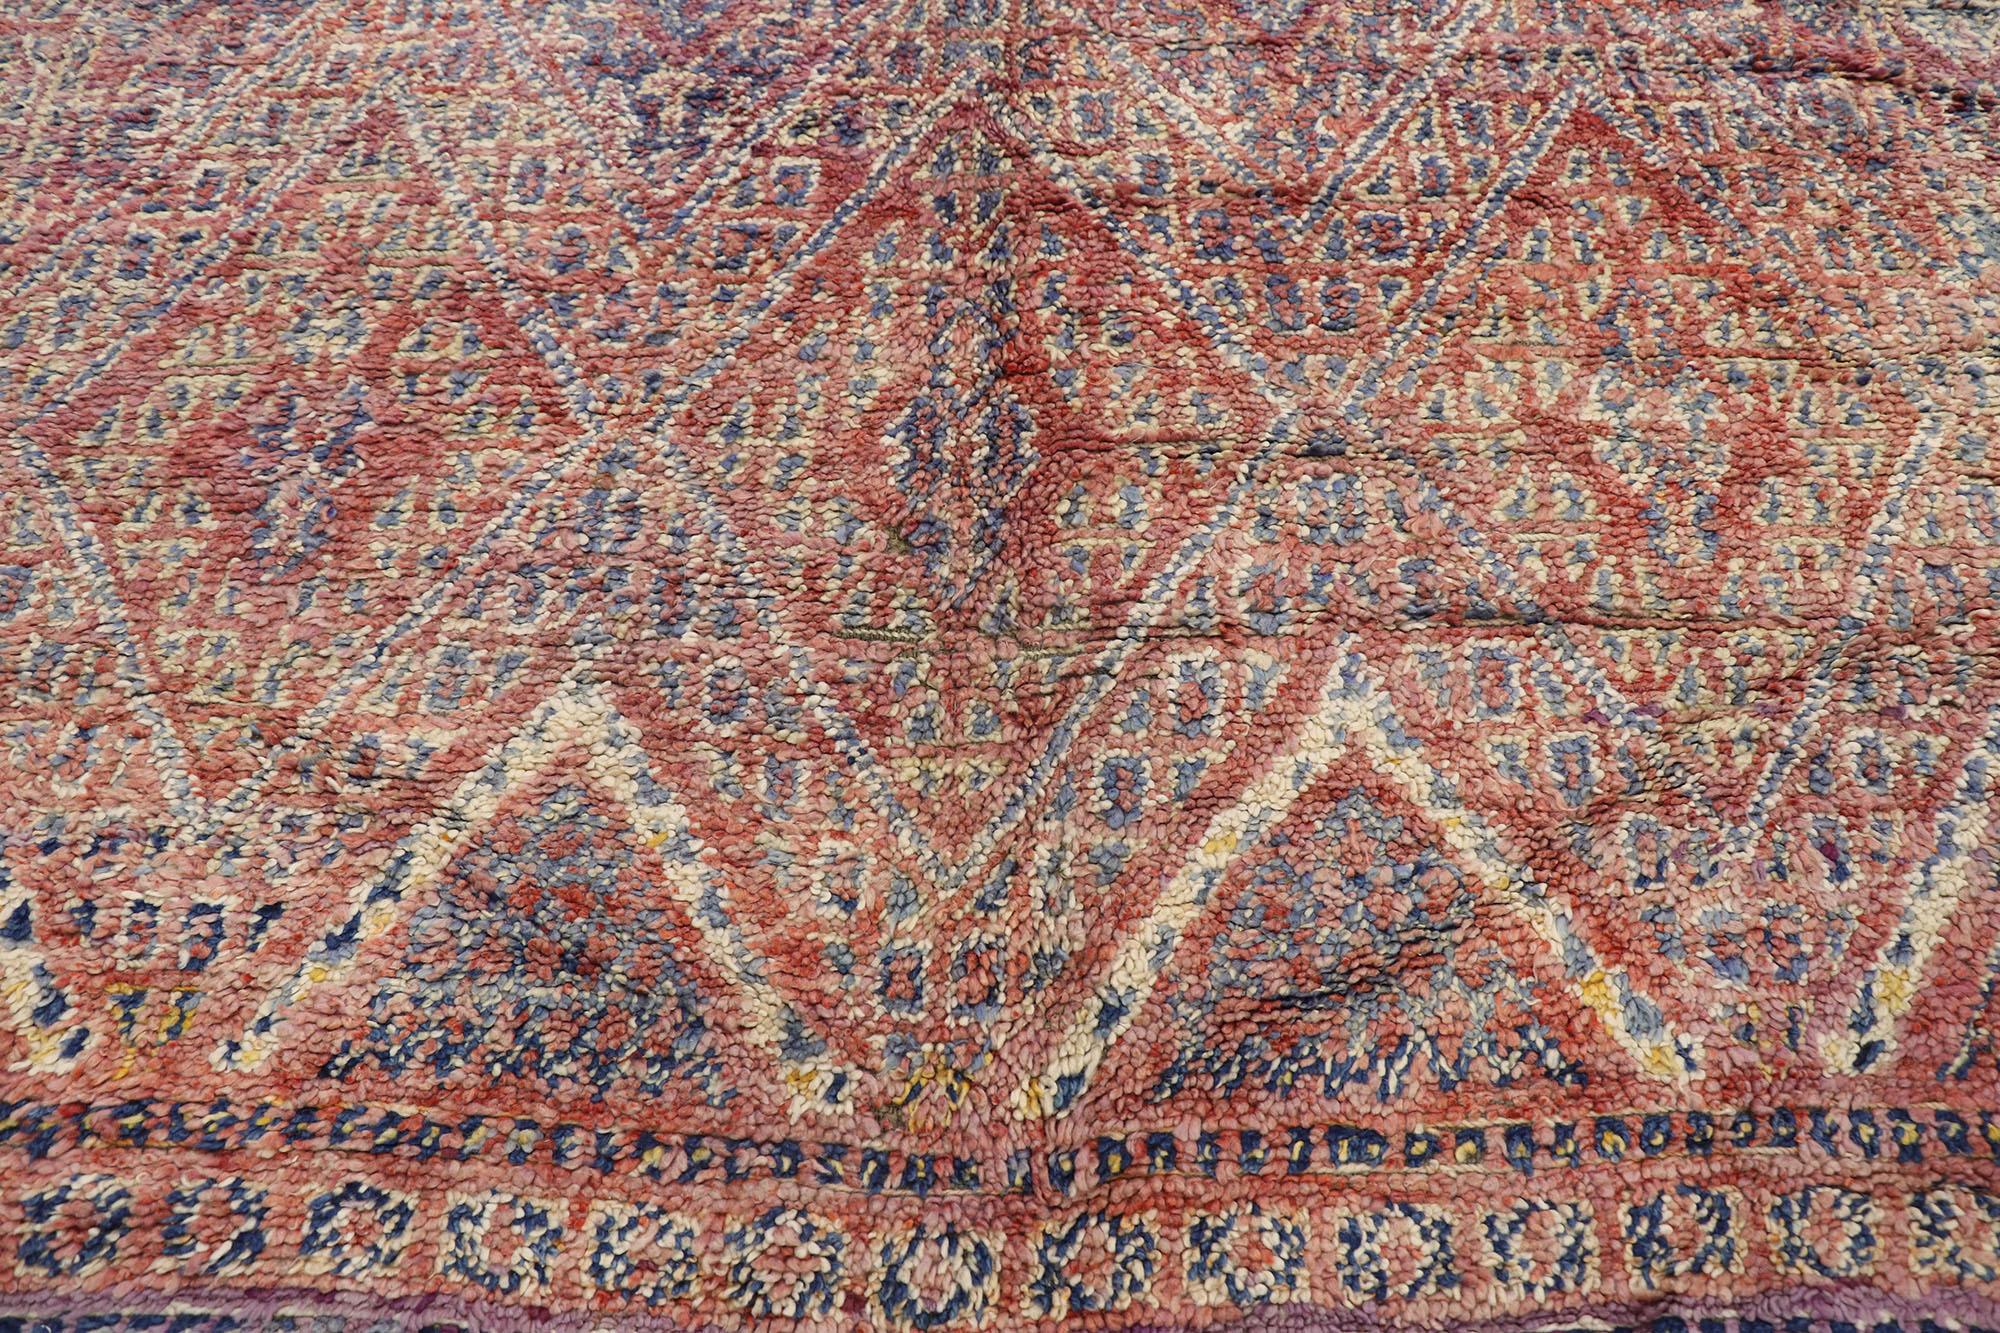 Vintage Beni MGuild Moroccan Rug, Cozy Nomad Meets Sultry Bohemian In Good Condition For Sale In Dallas, TX